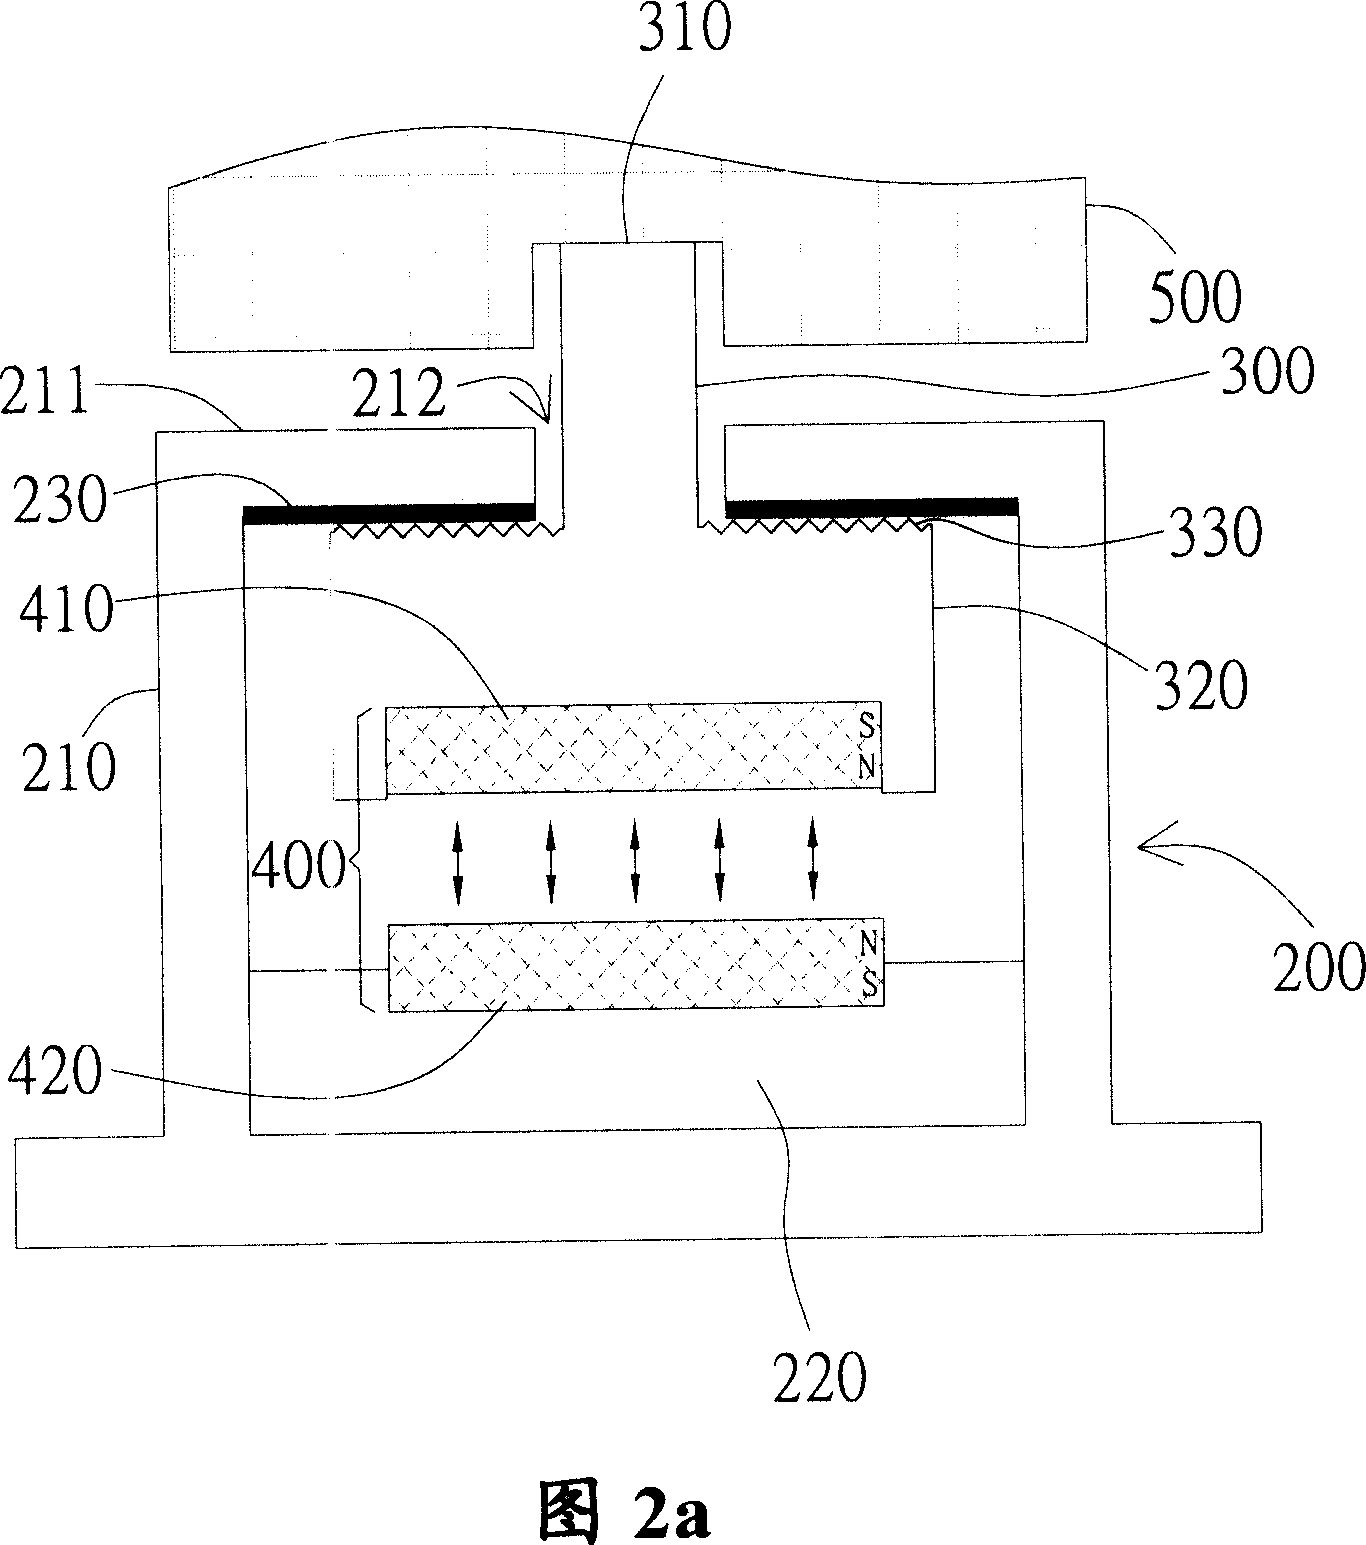 Stepless rotary positioning apparatus